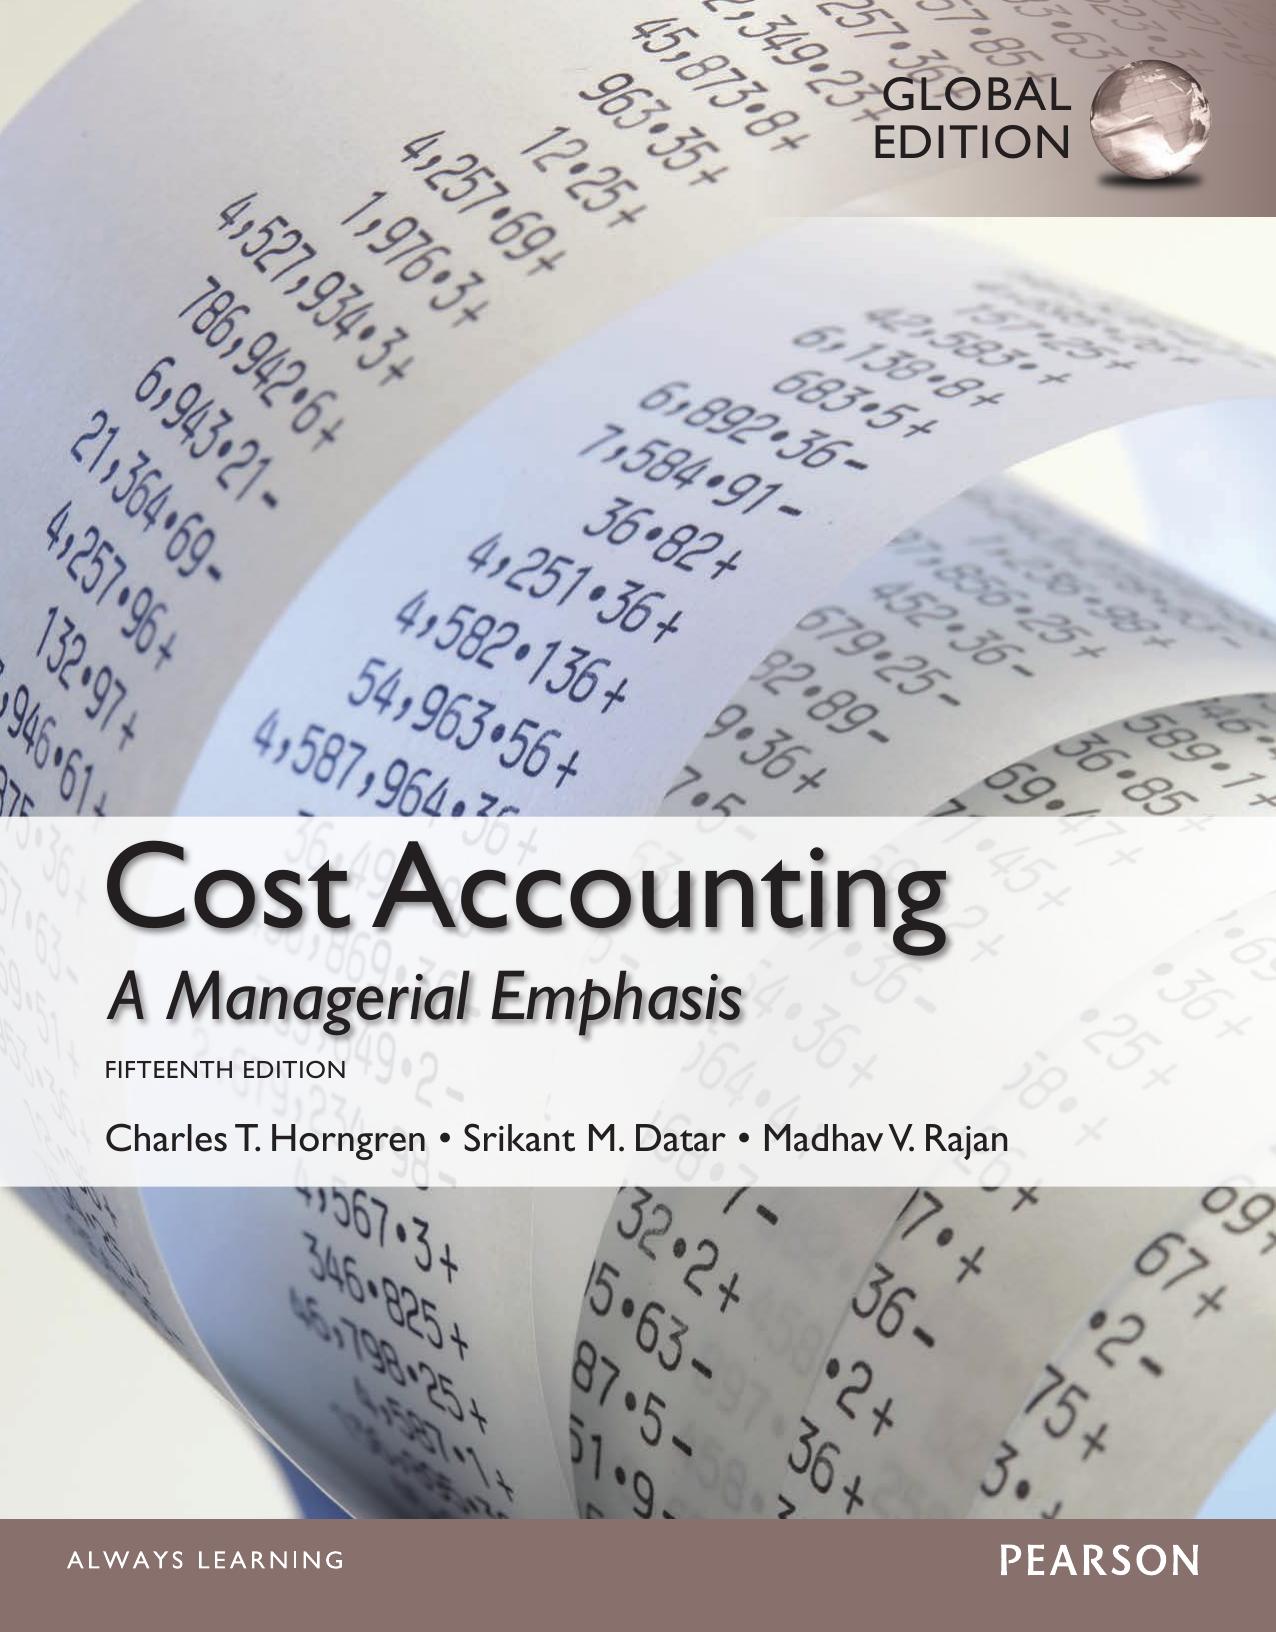 Cost Accounting A Managerial Emphasis 15th Global Edition by Madhav Rajan.jpg